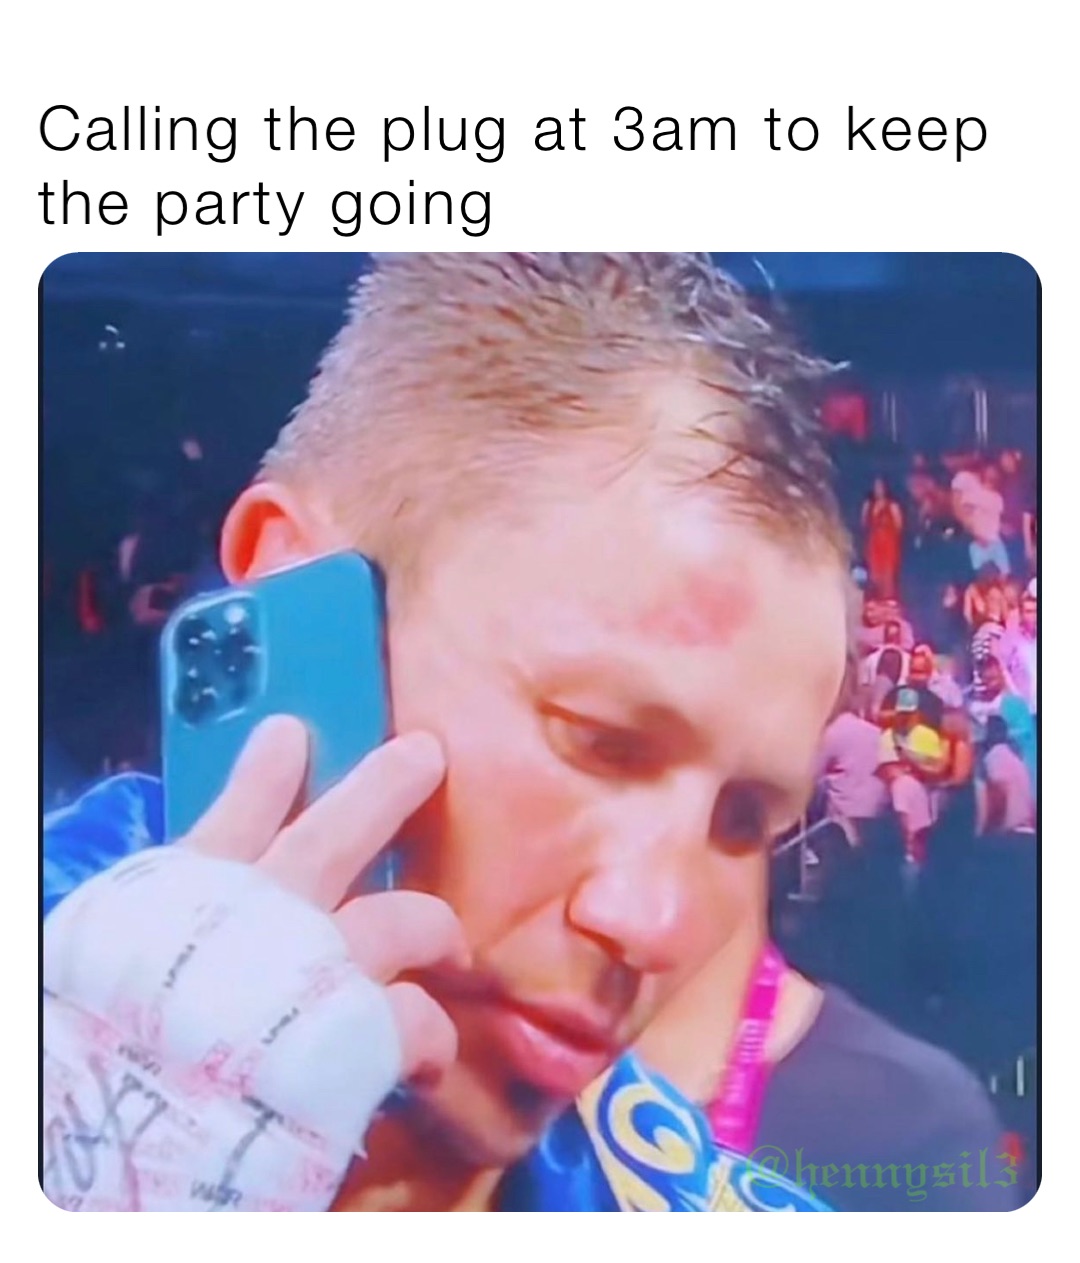 Calling the plug at 3am to keep the party going